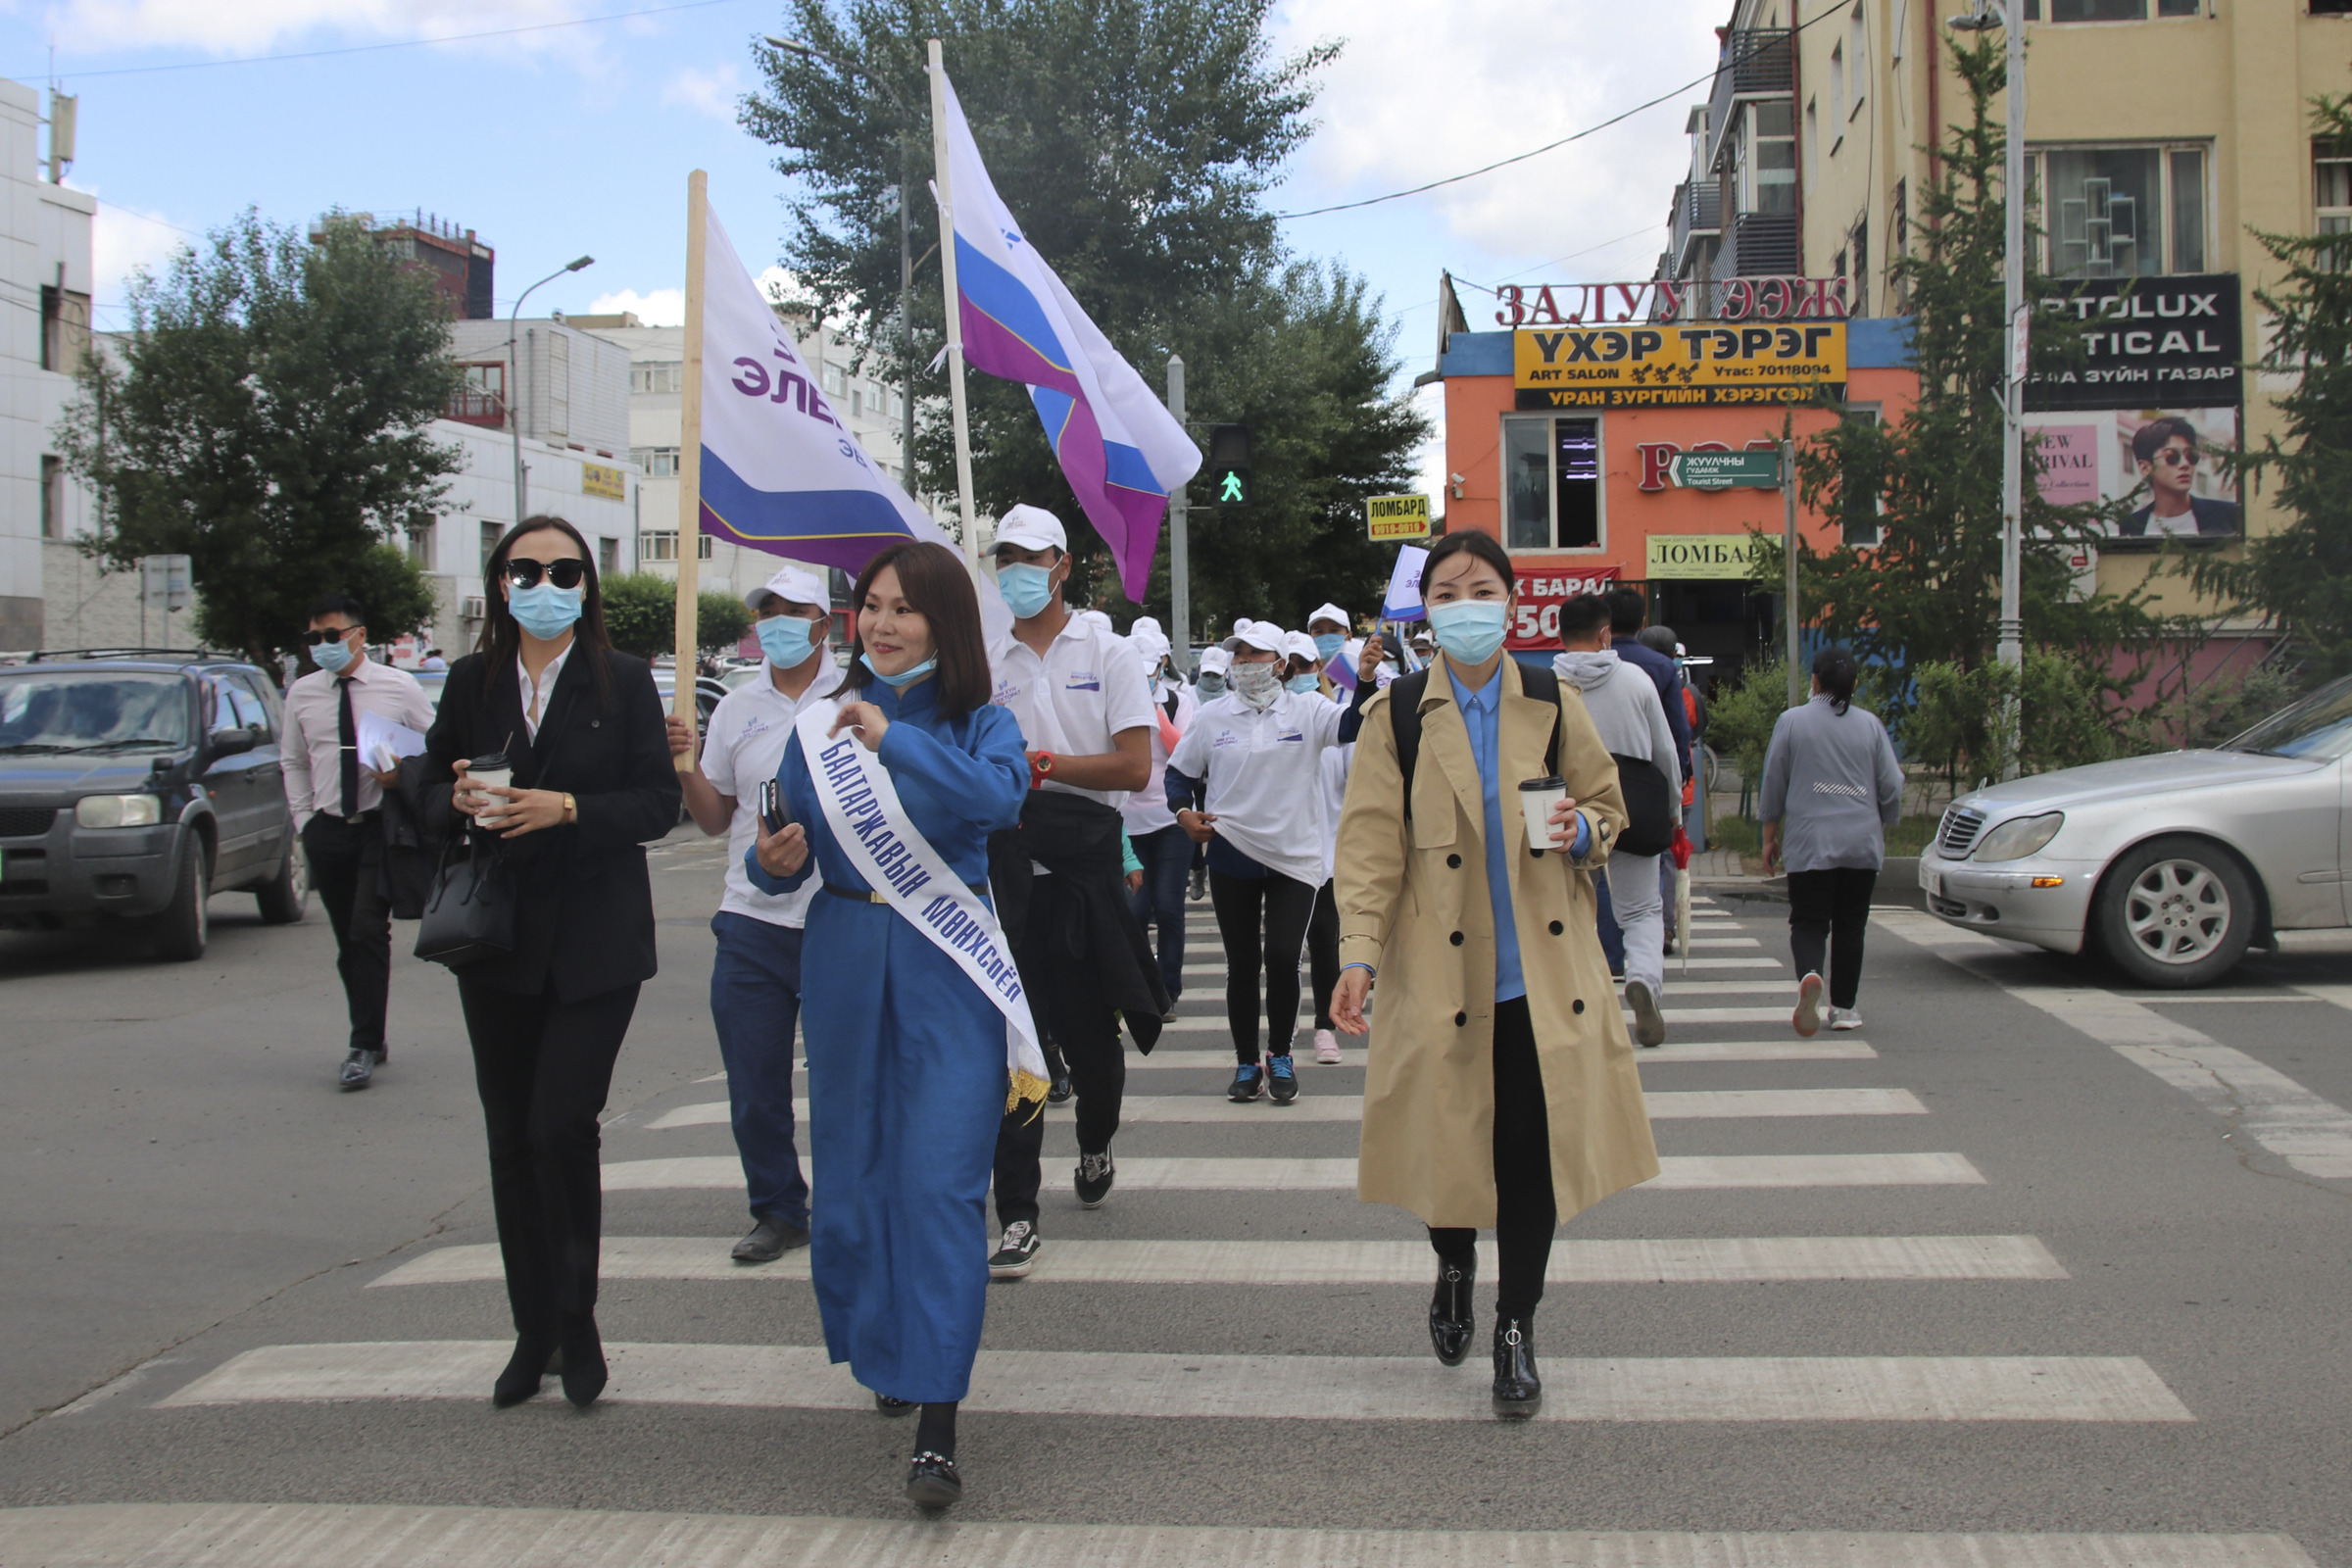 Munkhsoyol Baatarjav, female candidate of "Right person-Electorate" coalition led by National Labor Party, wearing long blue robe and white ribbon, walks with her supporters along the downtown street of Ulaanbaatar, Mongolia, Monday, June 22, 2020. Mongolia holds parliamentary elections on Wednesday, continuing a nearly 30-year democratic system in a vast but lightly populated country sandwiched between authoritarian regimes in Russia and China and beset by economic problems. (AP Photo/Ganbat Namjilsangarav)